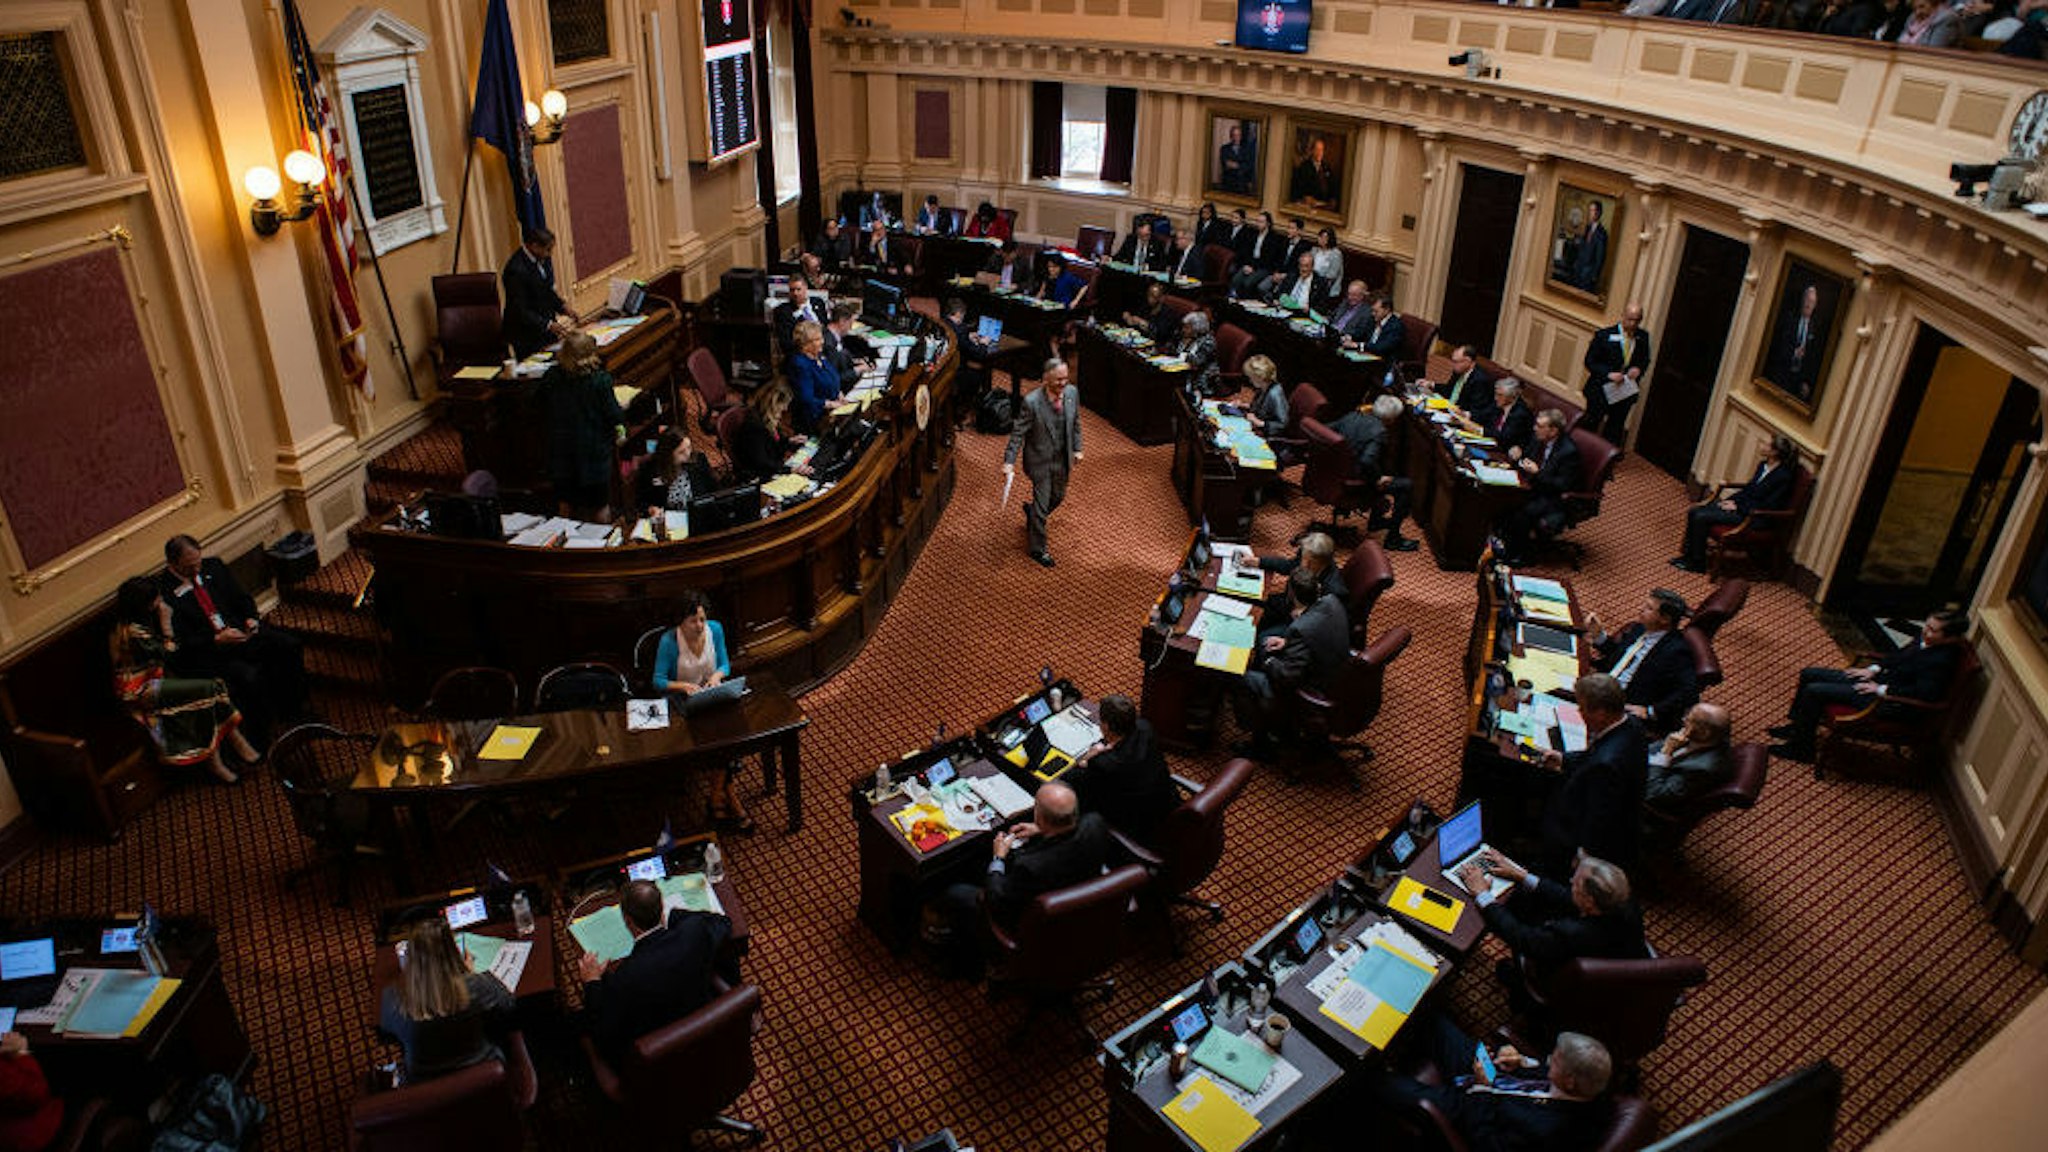 The opening of the 2019 session of the Virginia General Assembly is seen in the Senate chambers at the Capitol in on Wednesday, January 9, 2019, in Richmond, VA. (Photo by Salwan Georges/The Washington Post via Getty Images)